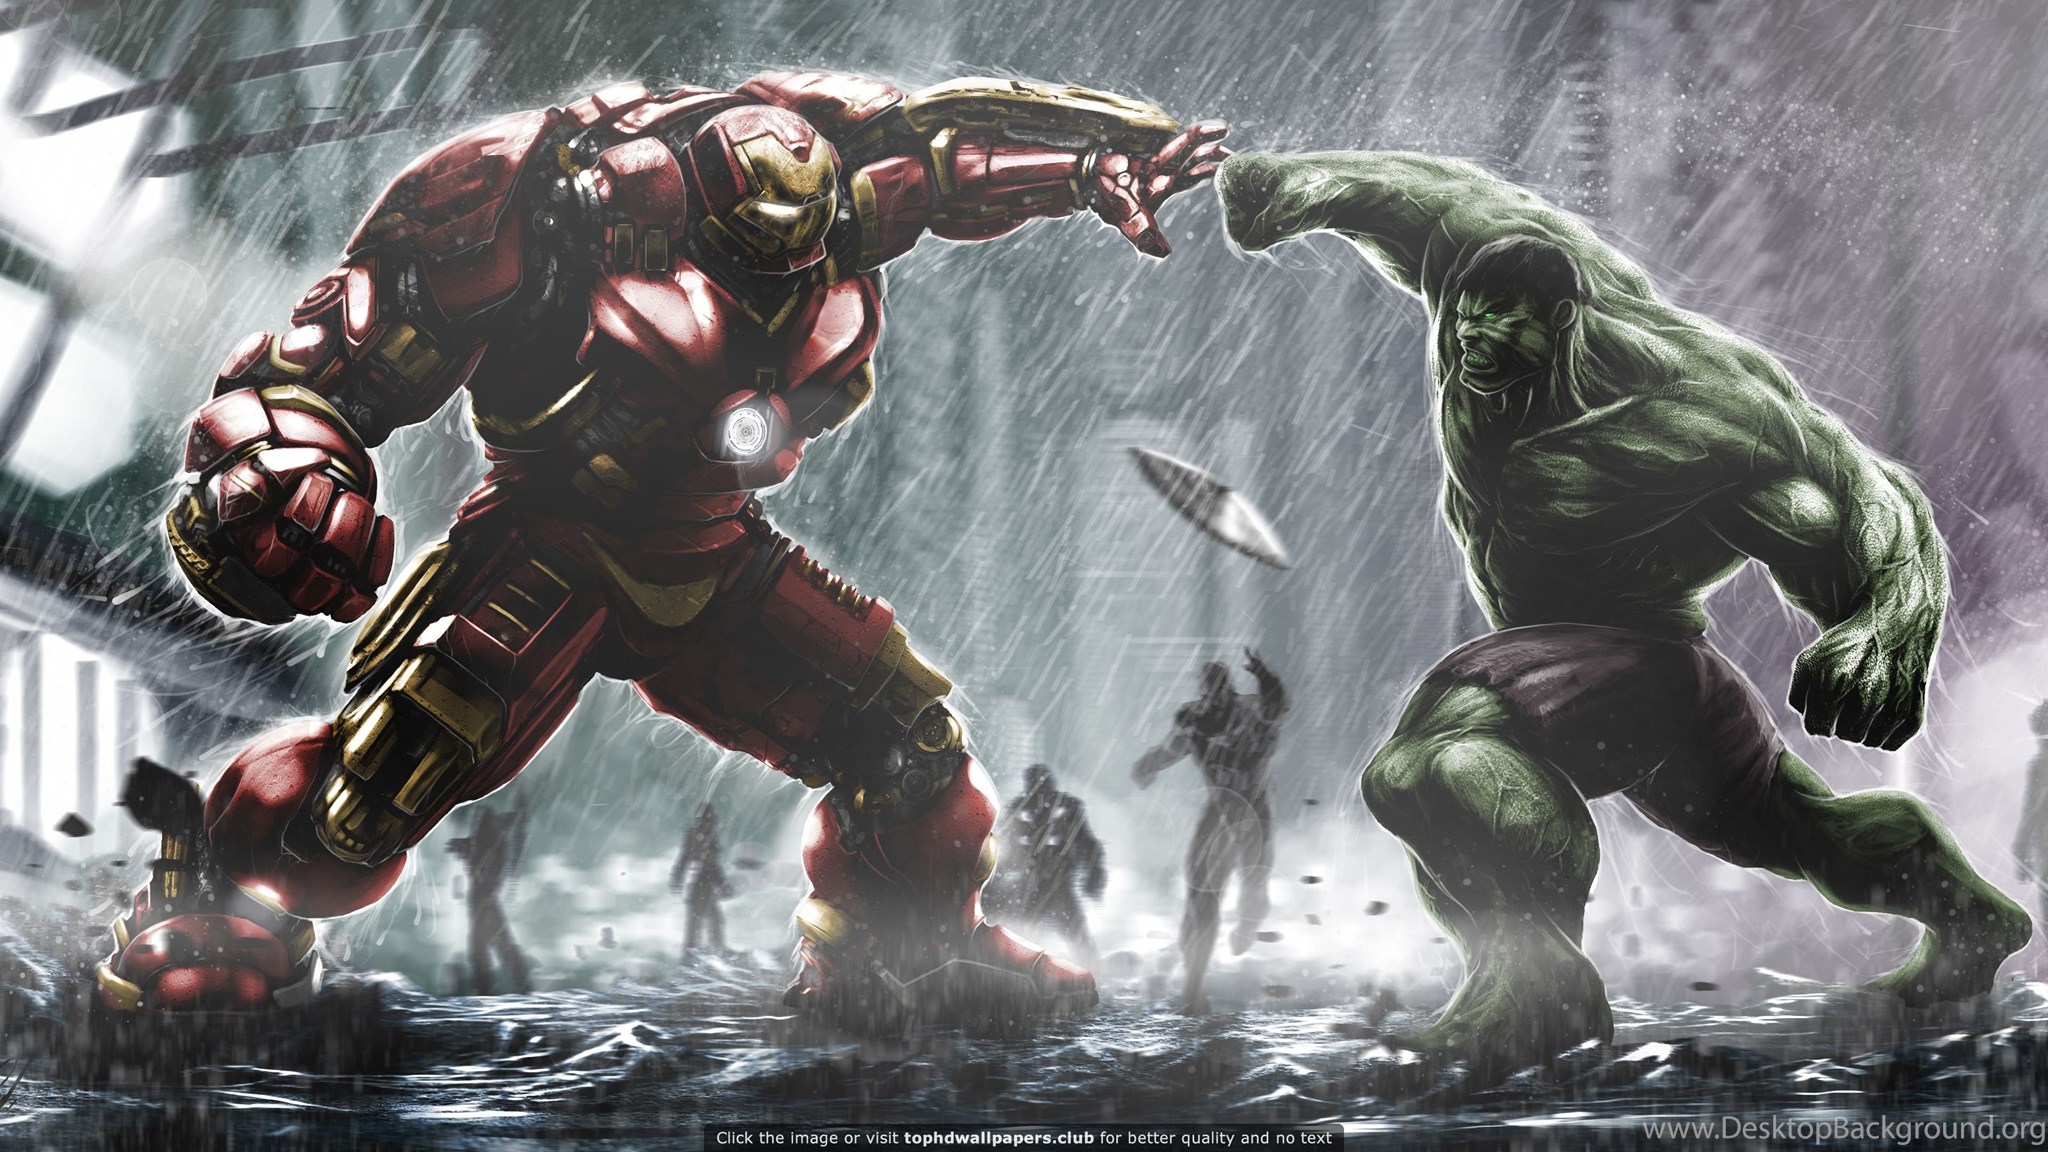 Best Hulk 4K Or HD Wallpapers For Your PC, Mac Or Mobile Device Desktop